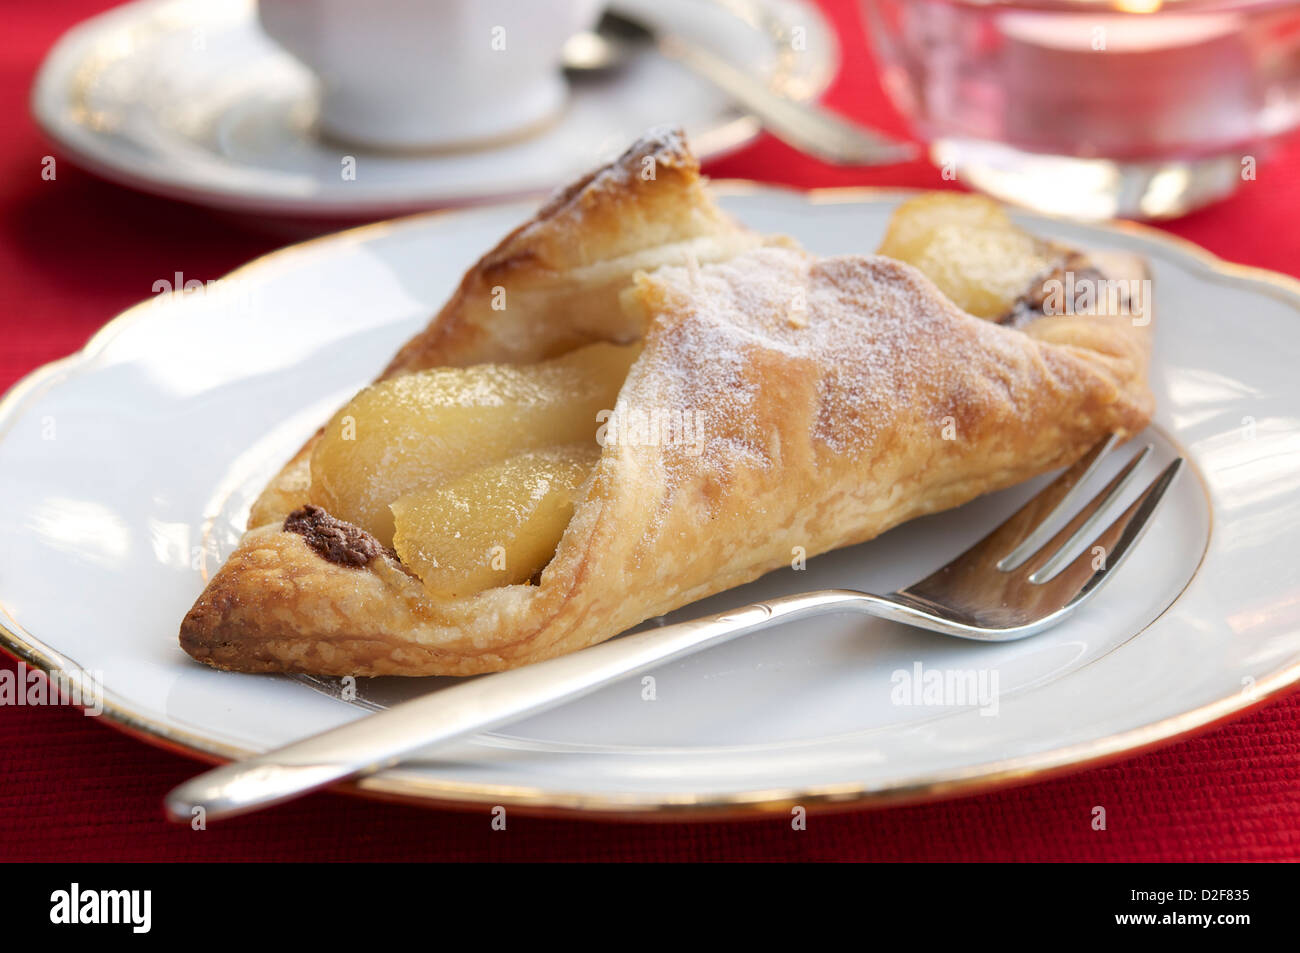 Puff pastry with pears, a chocolate hazelnut spread and walnuts. Stock Photo